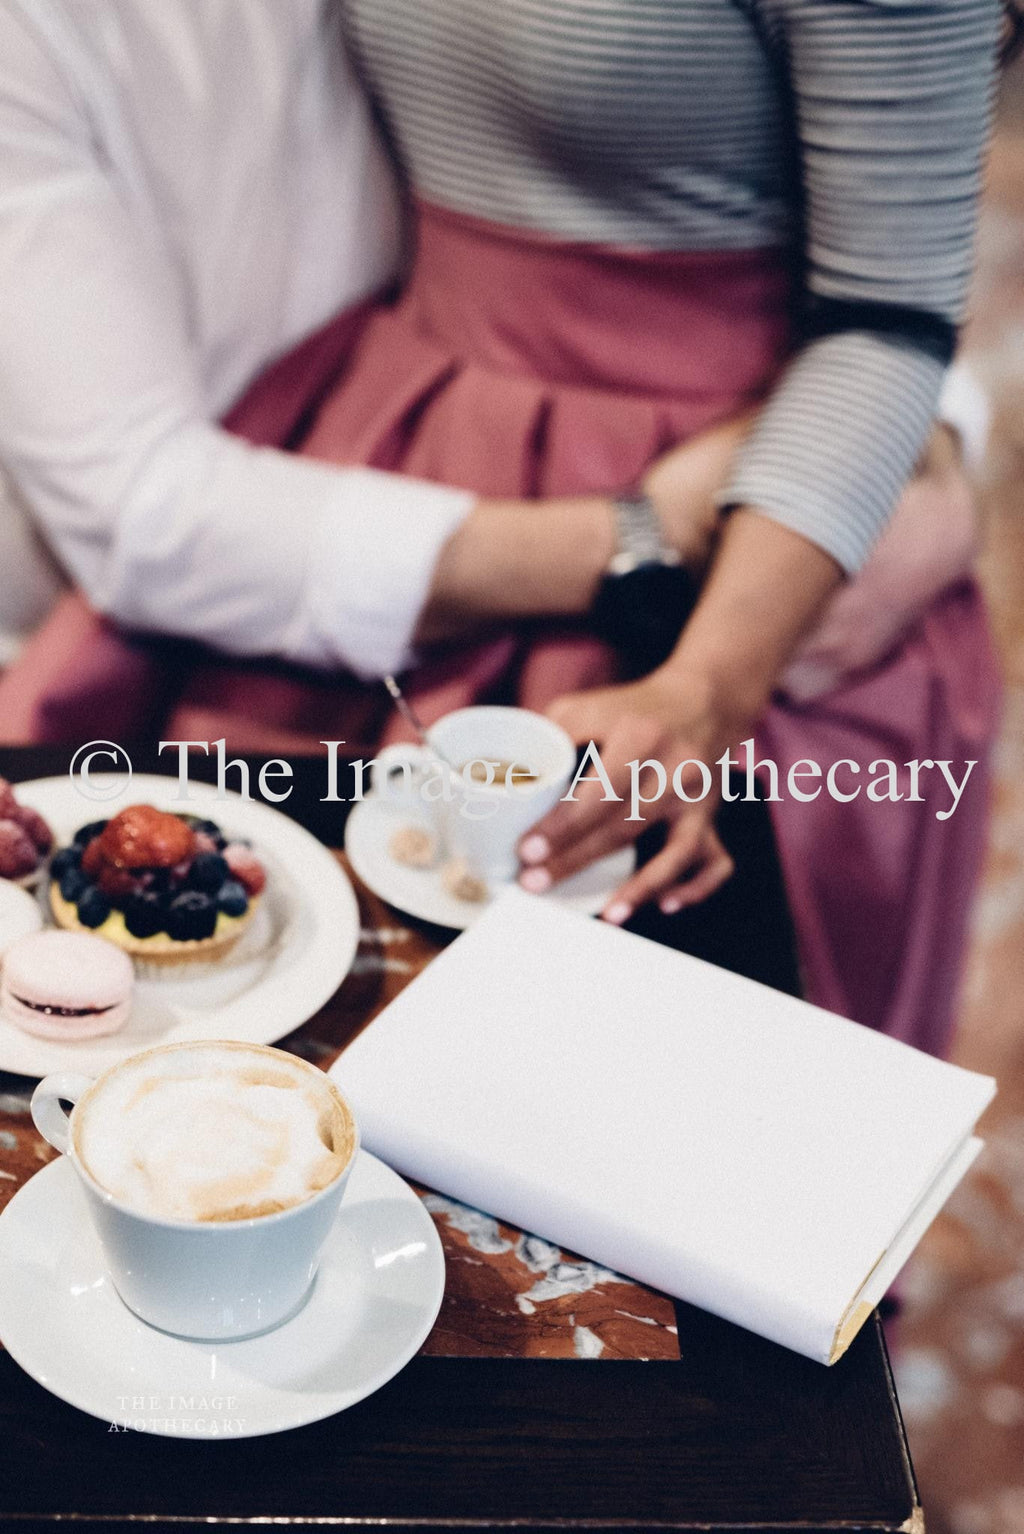 TheImageApothecary-321M - Stock Photography by The Image Apothecary